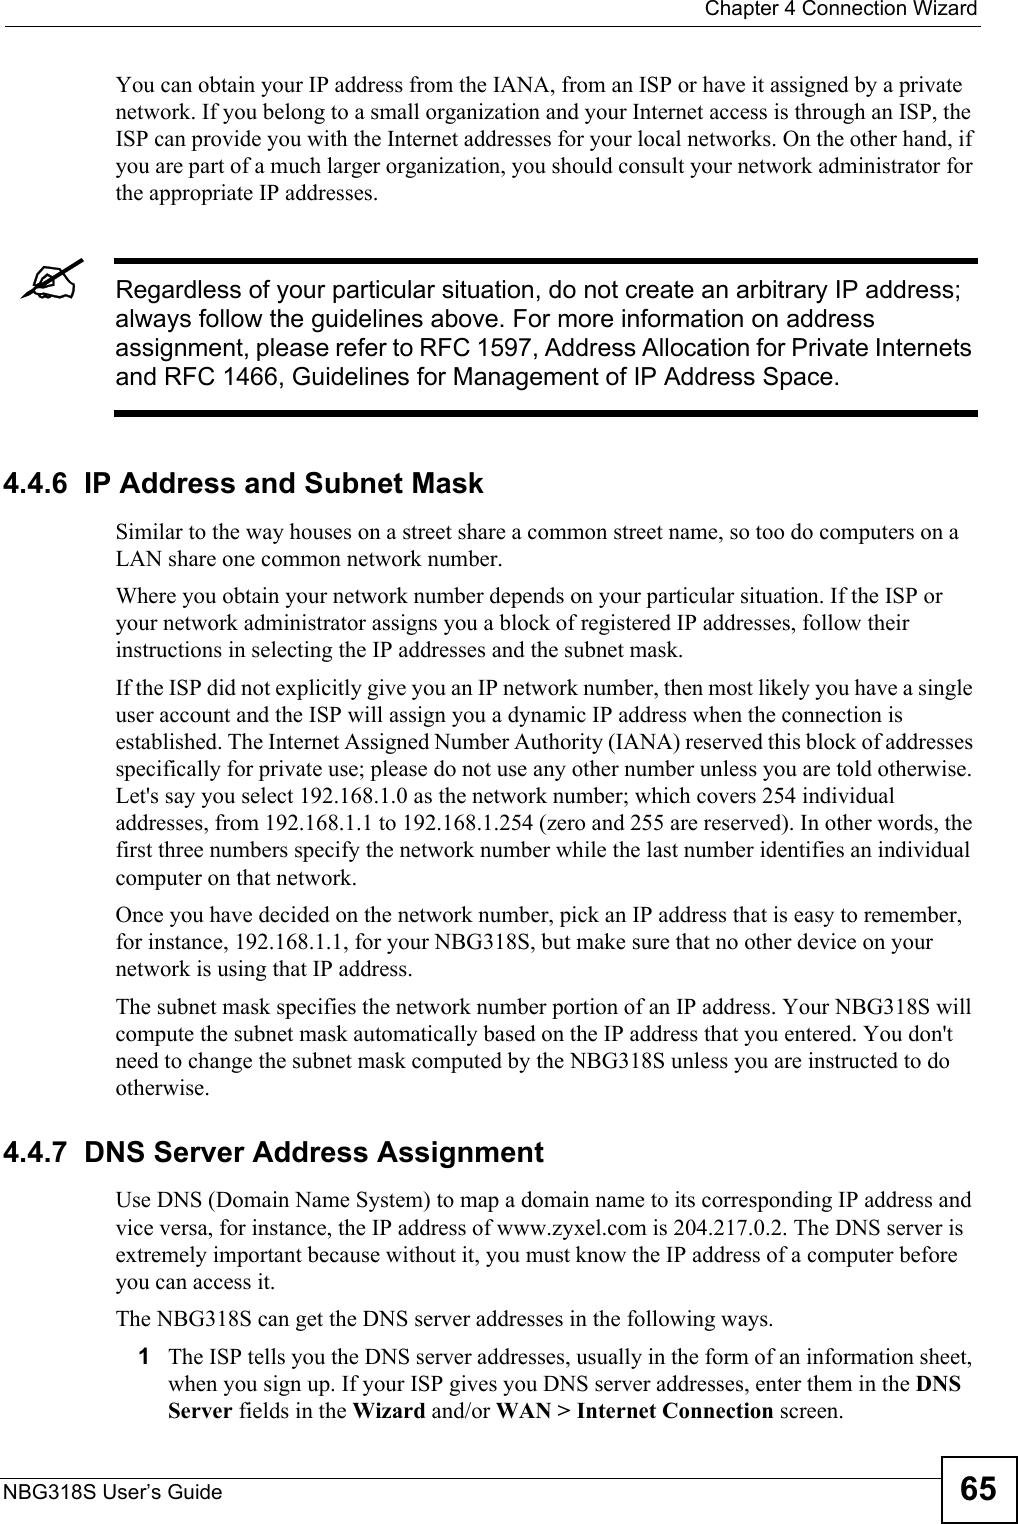  Chapter 4 Connection WizardNBG318S User’s Guide 65You can obtain your IP address from the IANA, from an ISP or have it assigned by a private network. If you belong to a small organization and your Internet access is through an ISP, the ISP can provide you with the Internet addresses for your local networks. On the other hand, if you are part of a much larger organization, you should consult your network administrator for the appropriate IP addresses.&quot;Regardless of your particular situation, do not create an arbitrary IP address; always follow the guidelines above. For more information on address assignment, please refer to RFC 1597, Address Allocation for Private Internets and RFC 1466, Guidelines for Management of IP Address Space.4.4.6  IP Address and Subnet MaskSimilar to the way houses on a street share a common street name, so too do computers on a LAN share one common network number.Where you obtain your network number depends on your particular situation. If the ISP or your network administrator assigns you a block of registered IP addresses, follow their instructions in selecting the IP addresses and the subnet mask.If the ISP did not explicitly give you an IP network number, then most likely you have a single user account and the ISP will assign you a dynamic IP address when the connection is established. The Internet Assigned Number Authority (IANA) reserved this block of addresses specifically for private use; please do not use any other number unless you are told otherwise. Let&apos;s say you select 192.168.1.0 as the network number; which covers 254 individual addresses, from 192.168.1.1 to 192.168.1.254 (zero and 255 are reserved). In other words, the first three numbers specify the network number while the last number identifies an individual computer on that network.Once you have decided on the network number, pick an IP address that is easy to remember, for instance, 192.168.1.1, for your NBG318S, but make sure that no other device on your network is using that IP address.The subnet mask specifies the network number portion of an IP address. Your NBG318S will compute the subnet mask automatically based on the IP address that you entered. You don&apos;t need to change the subnet mask computed by the NBG318S unless you are instructed to do otherwise.4.4.7  DNS Server Address AssignmentUse DNS (Domain Name System) to map a domain name to its corresponding IP address and vice versa, for instance, the IP address of www.zyxel.com is 204.217.0.2. The DNS server is extremely important because without it, you must know the IP address of a computer before you can access it. The NBG318S can get the DNS server addresses in the following ways.1The ISP tells you the DNS server addresses, usually in the form of an information sheet, when you sign up. If your ISP gives you DNS server addresses, enter them in the DNS Server fields in the Wizard and/or WAN &gt; Internet Connection screen.